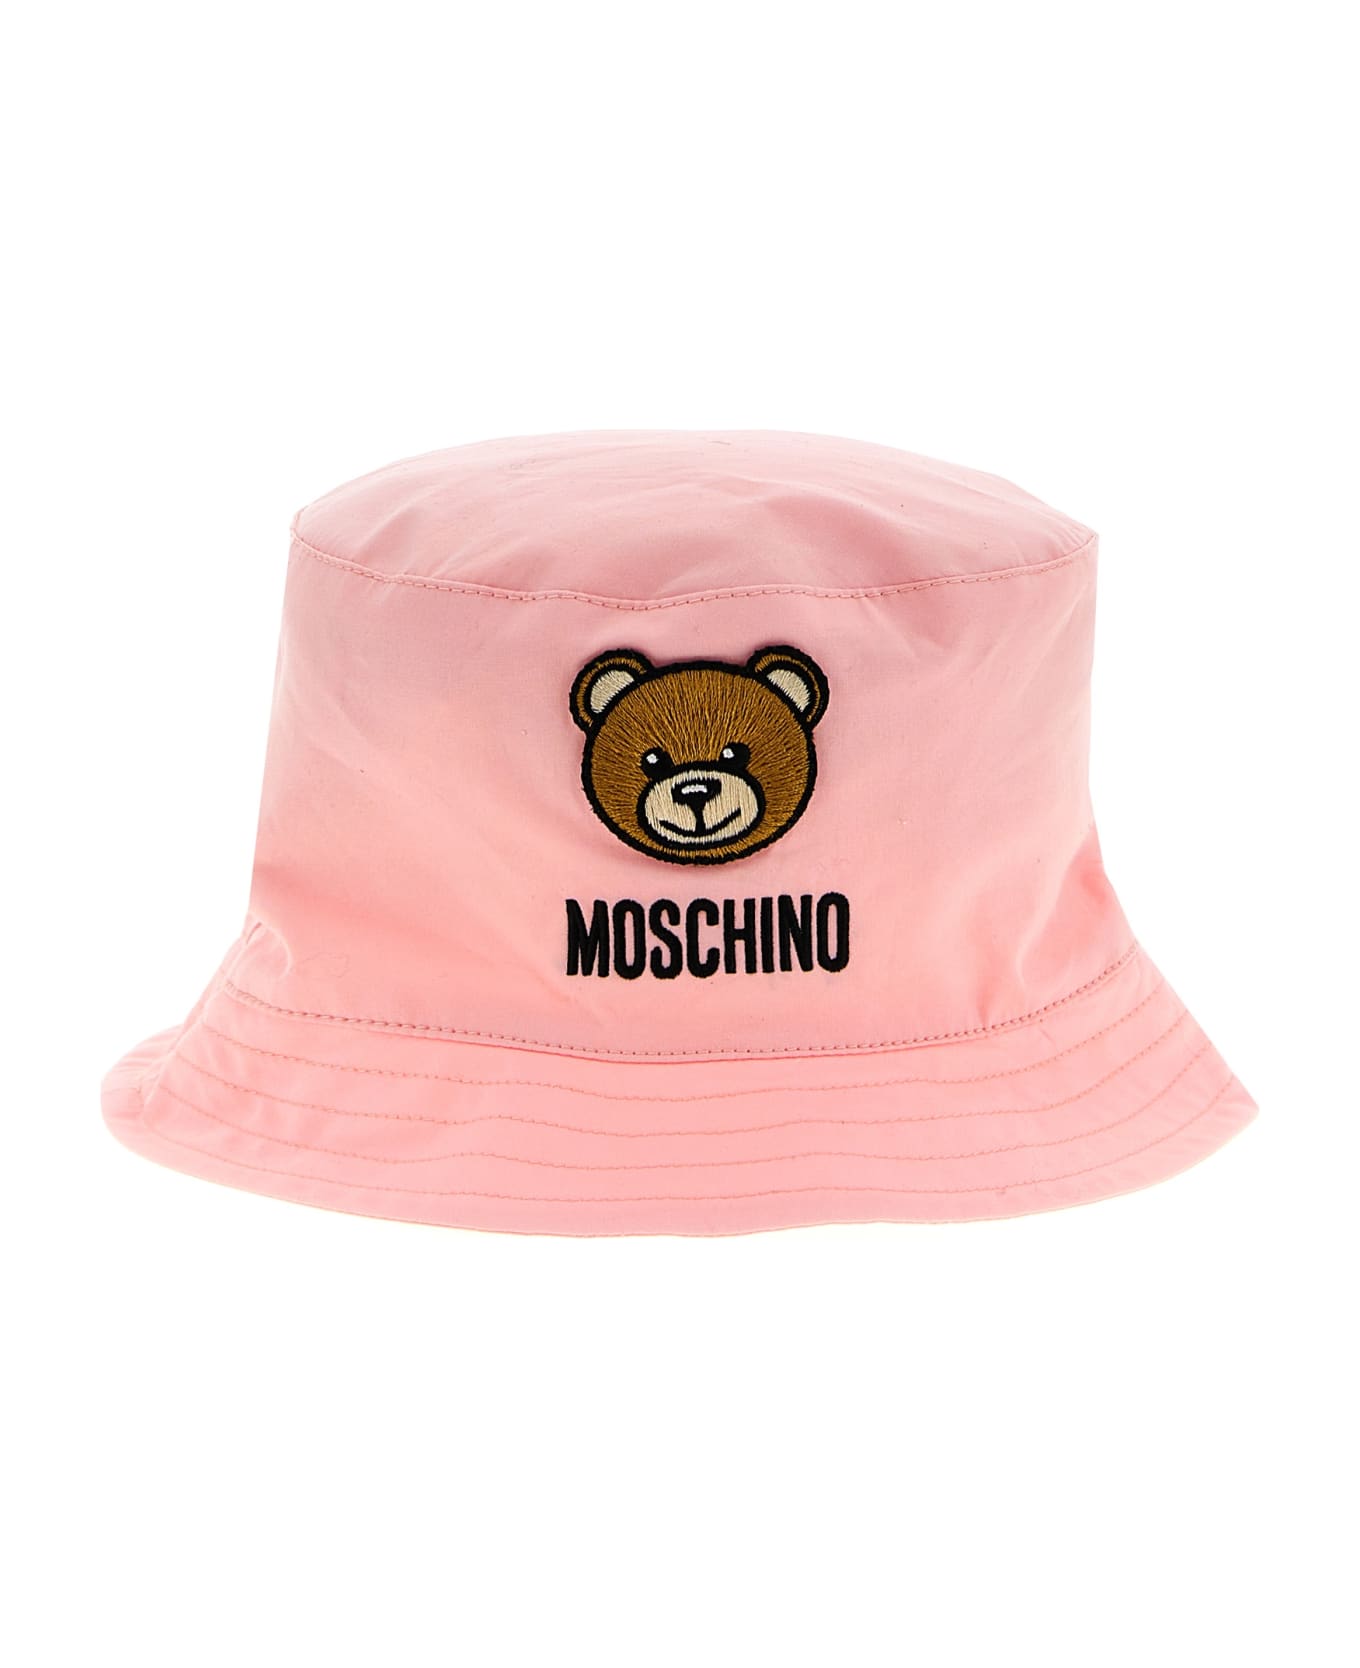 Moschino Logo Embroidery Bucket Hat - Pink アクセサリー＆ギフト